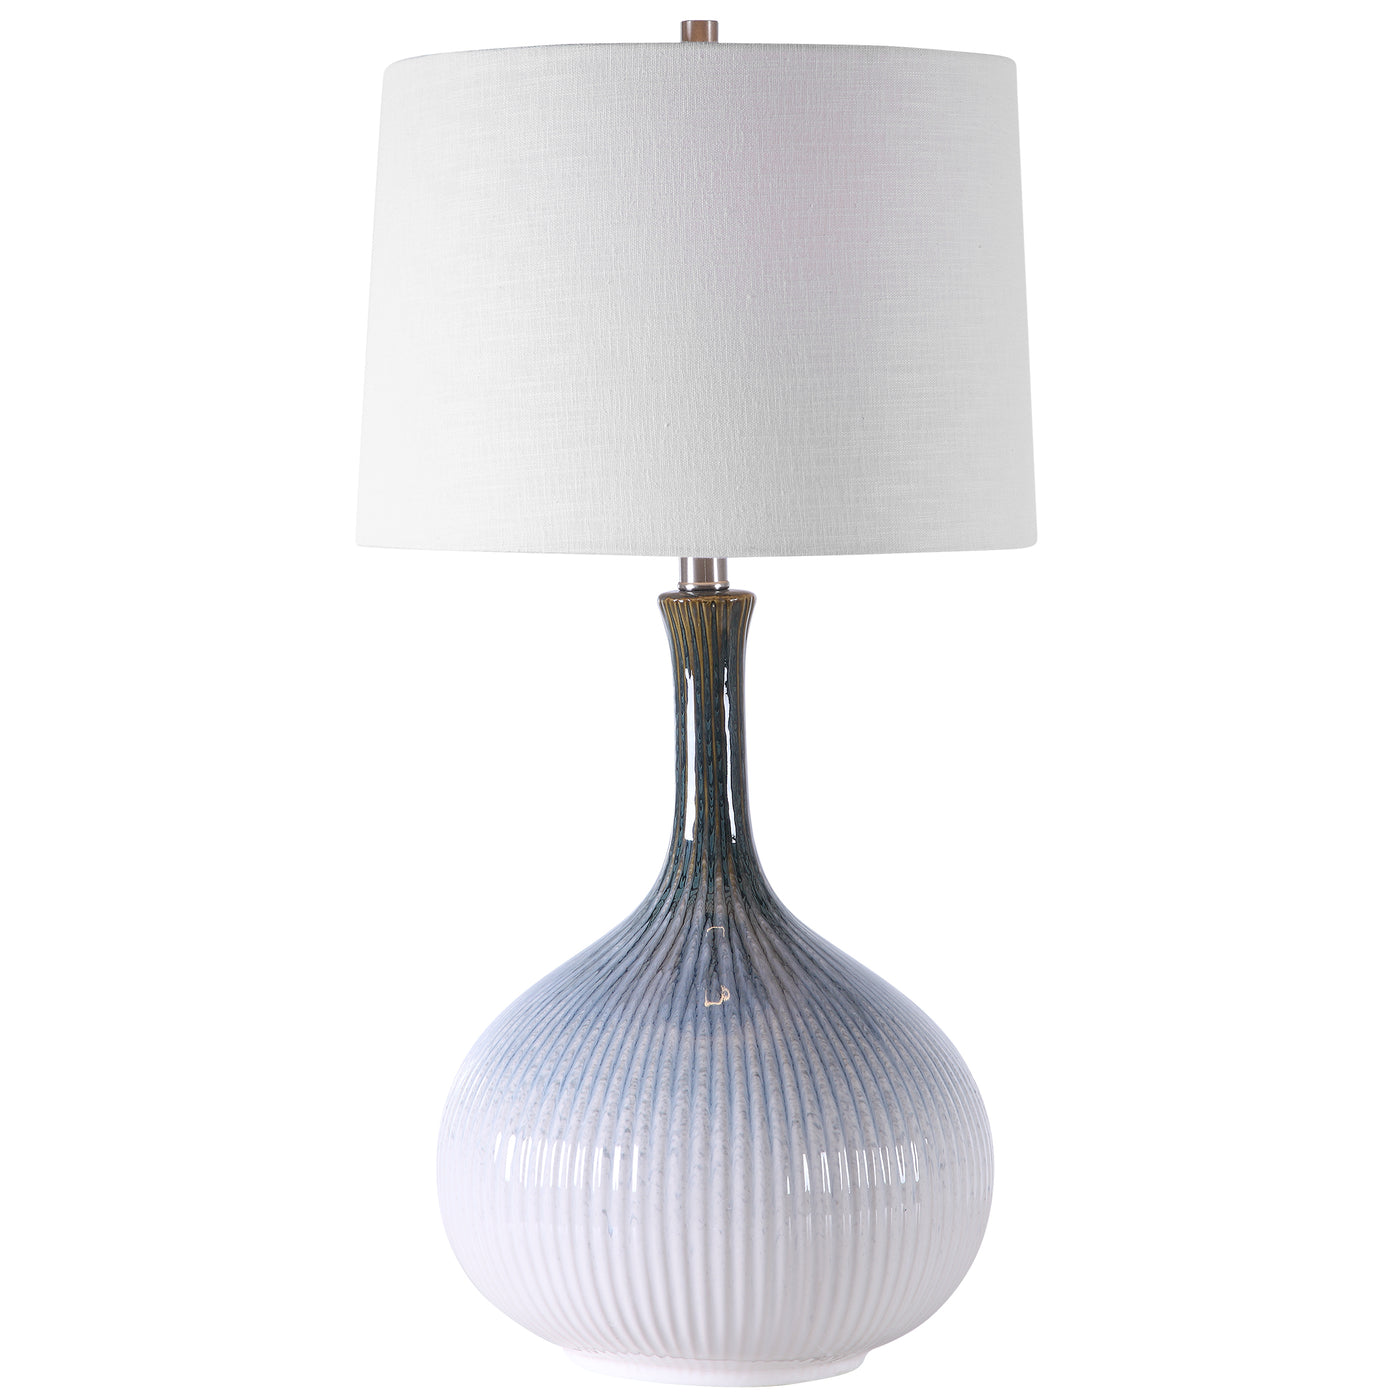 Mid-century Inspired Table Lamp Has A Fluted Ceramic Base With Noticeable Ribbed Texture And Is Finished In A Cream, Light...